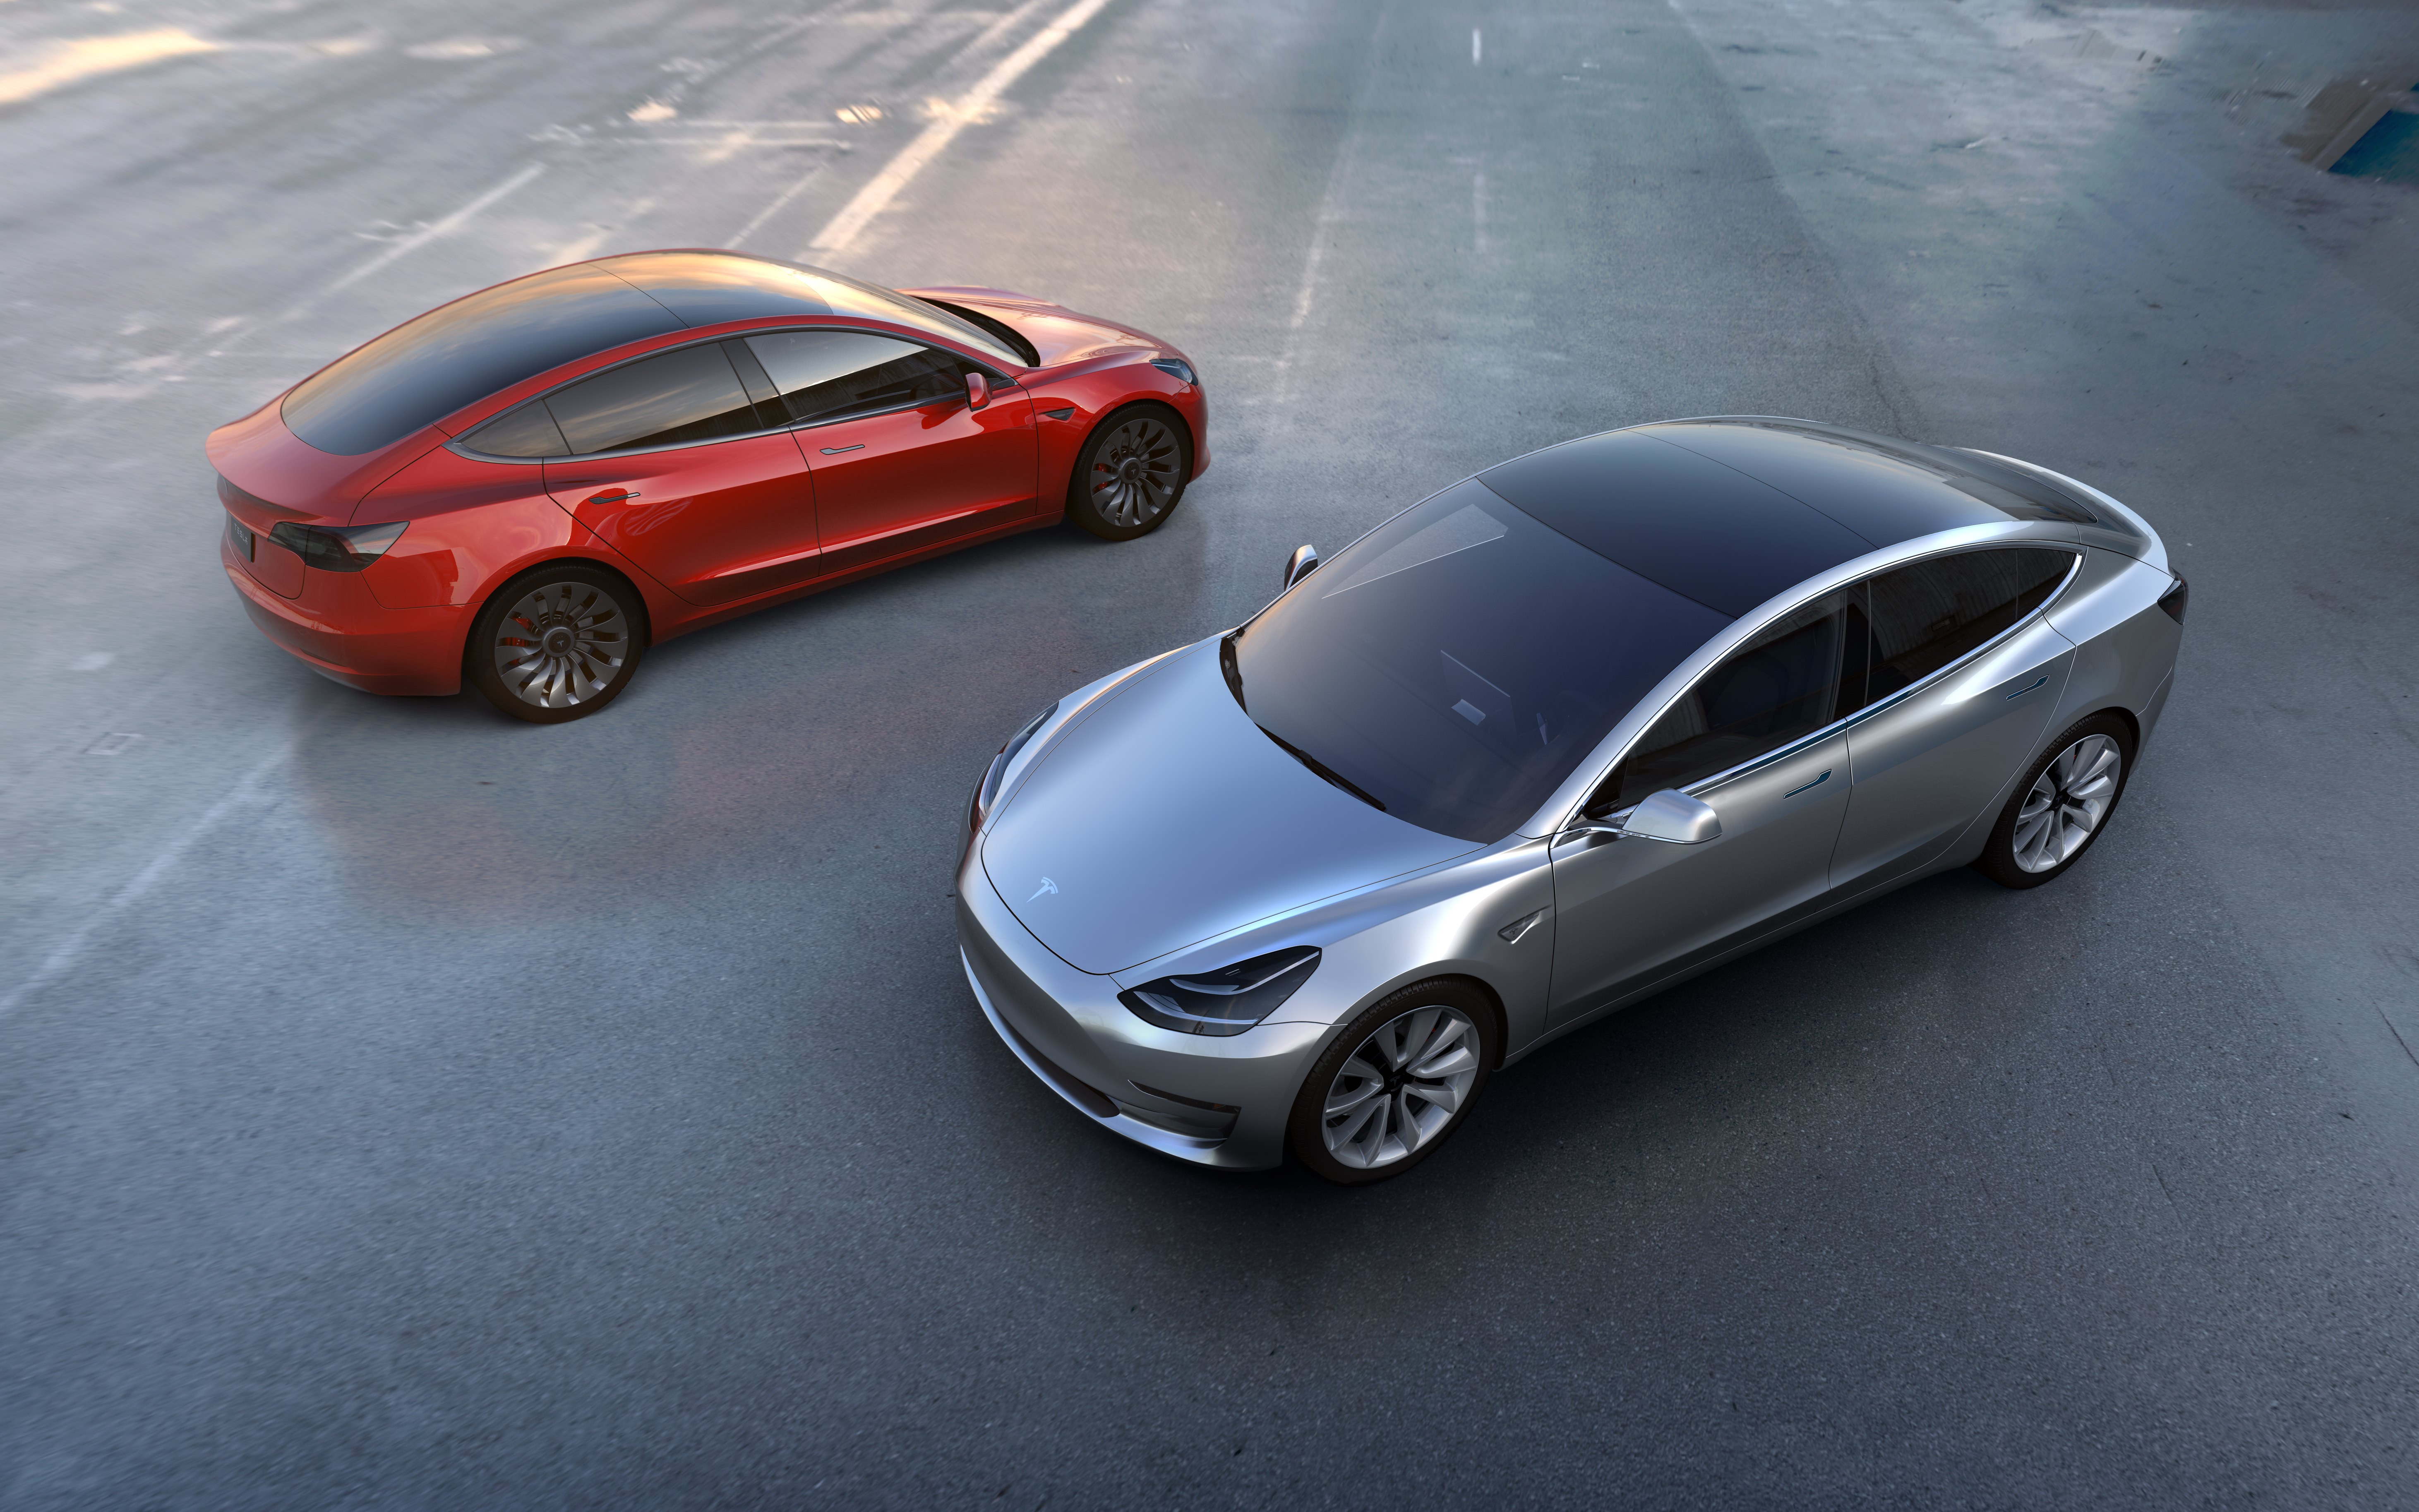 2017-07-03 09:36:17 epa06063955 A undated handout photo made available by Tesla Motors on 03 July 2017 shows Tesla Model 3 in red and silver. The all-electric Model 3 was unveiled on 31 March 2016. According to a tweet by Elon Musk, CEO of Tesla Inc., Model 3 passed all regulatory requirements for production and is expected to be rolling off production line this week. EPA/HANDOUT HANDOUT HANDOUT EDITORIAL USE ONLY/NO SALES